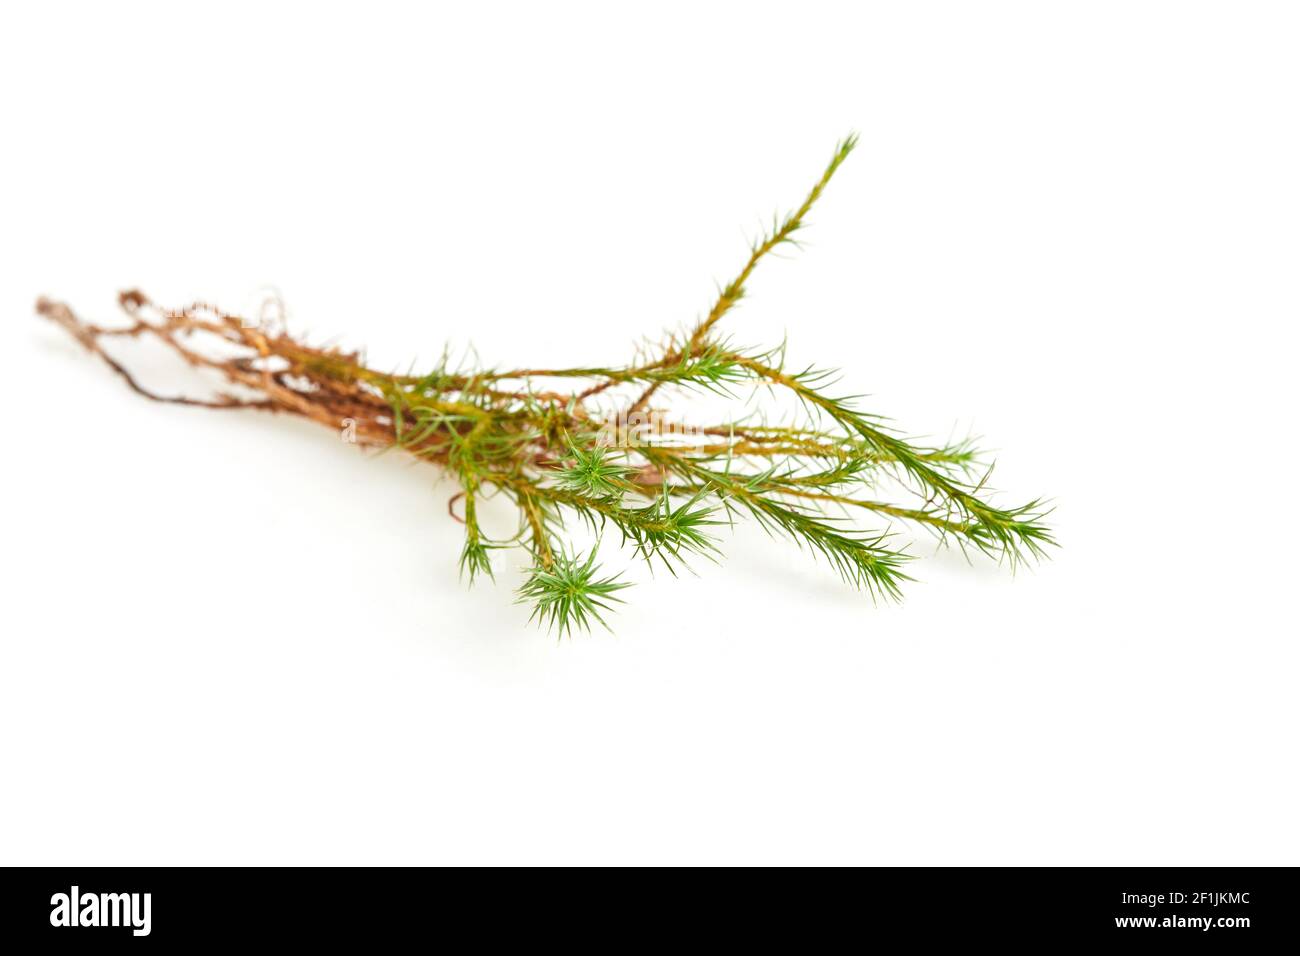 Haircap moss (gametophyte with sporophyte) isolated on a white background. Studio shot Stock Photo